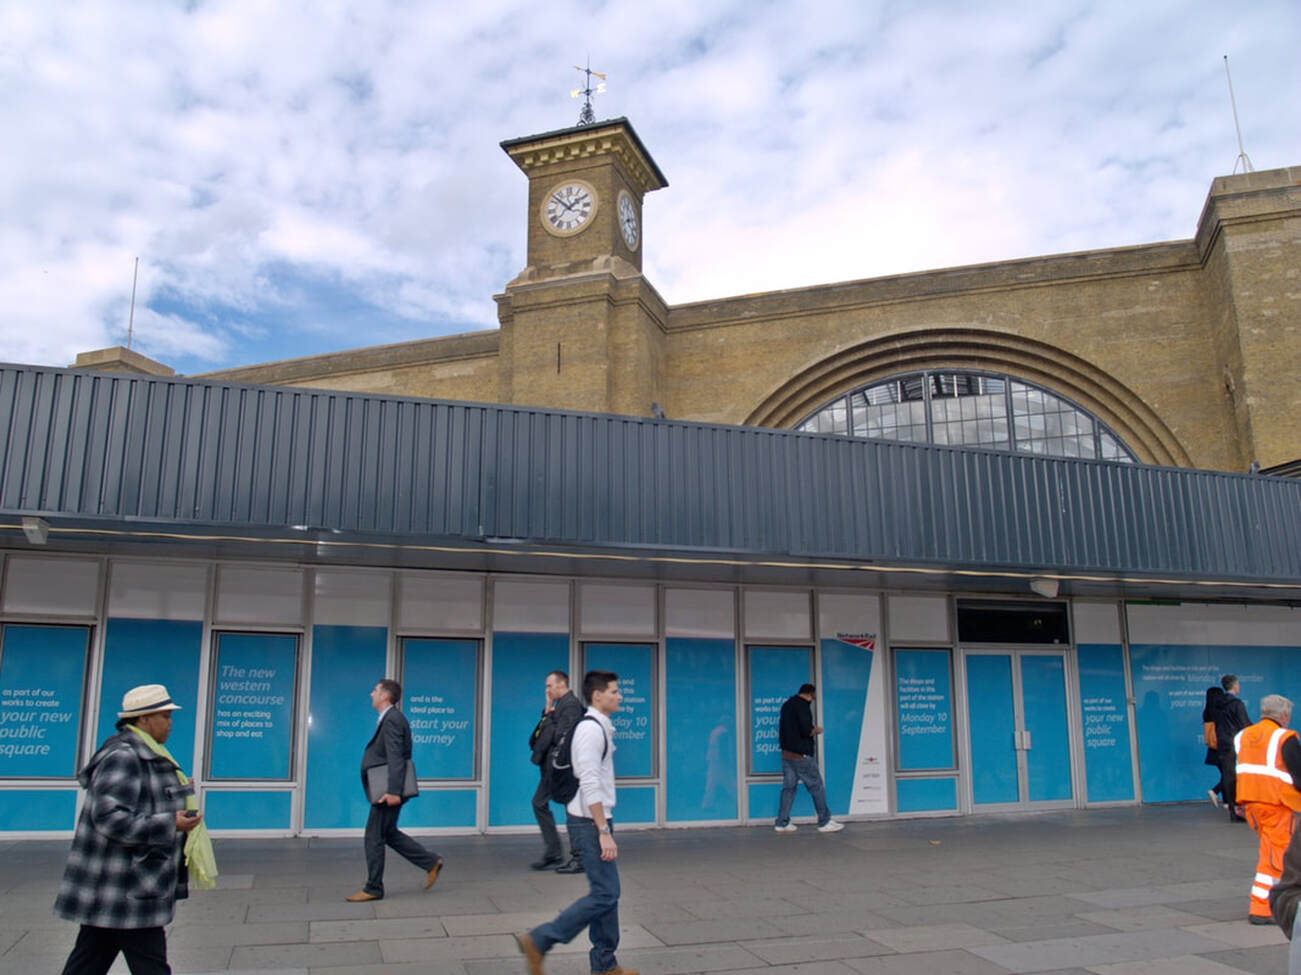  Boarded up old concourse frontage at King's Cross Station in London